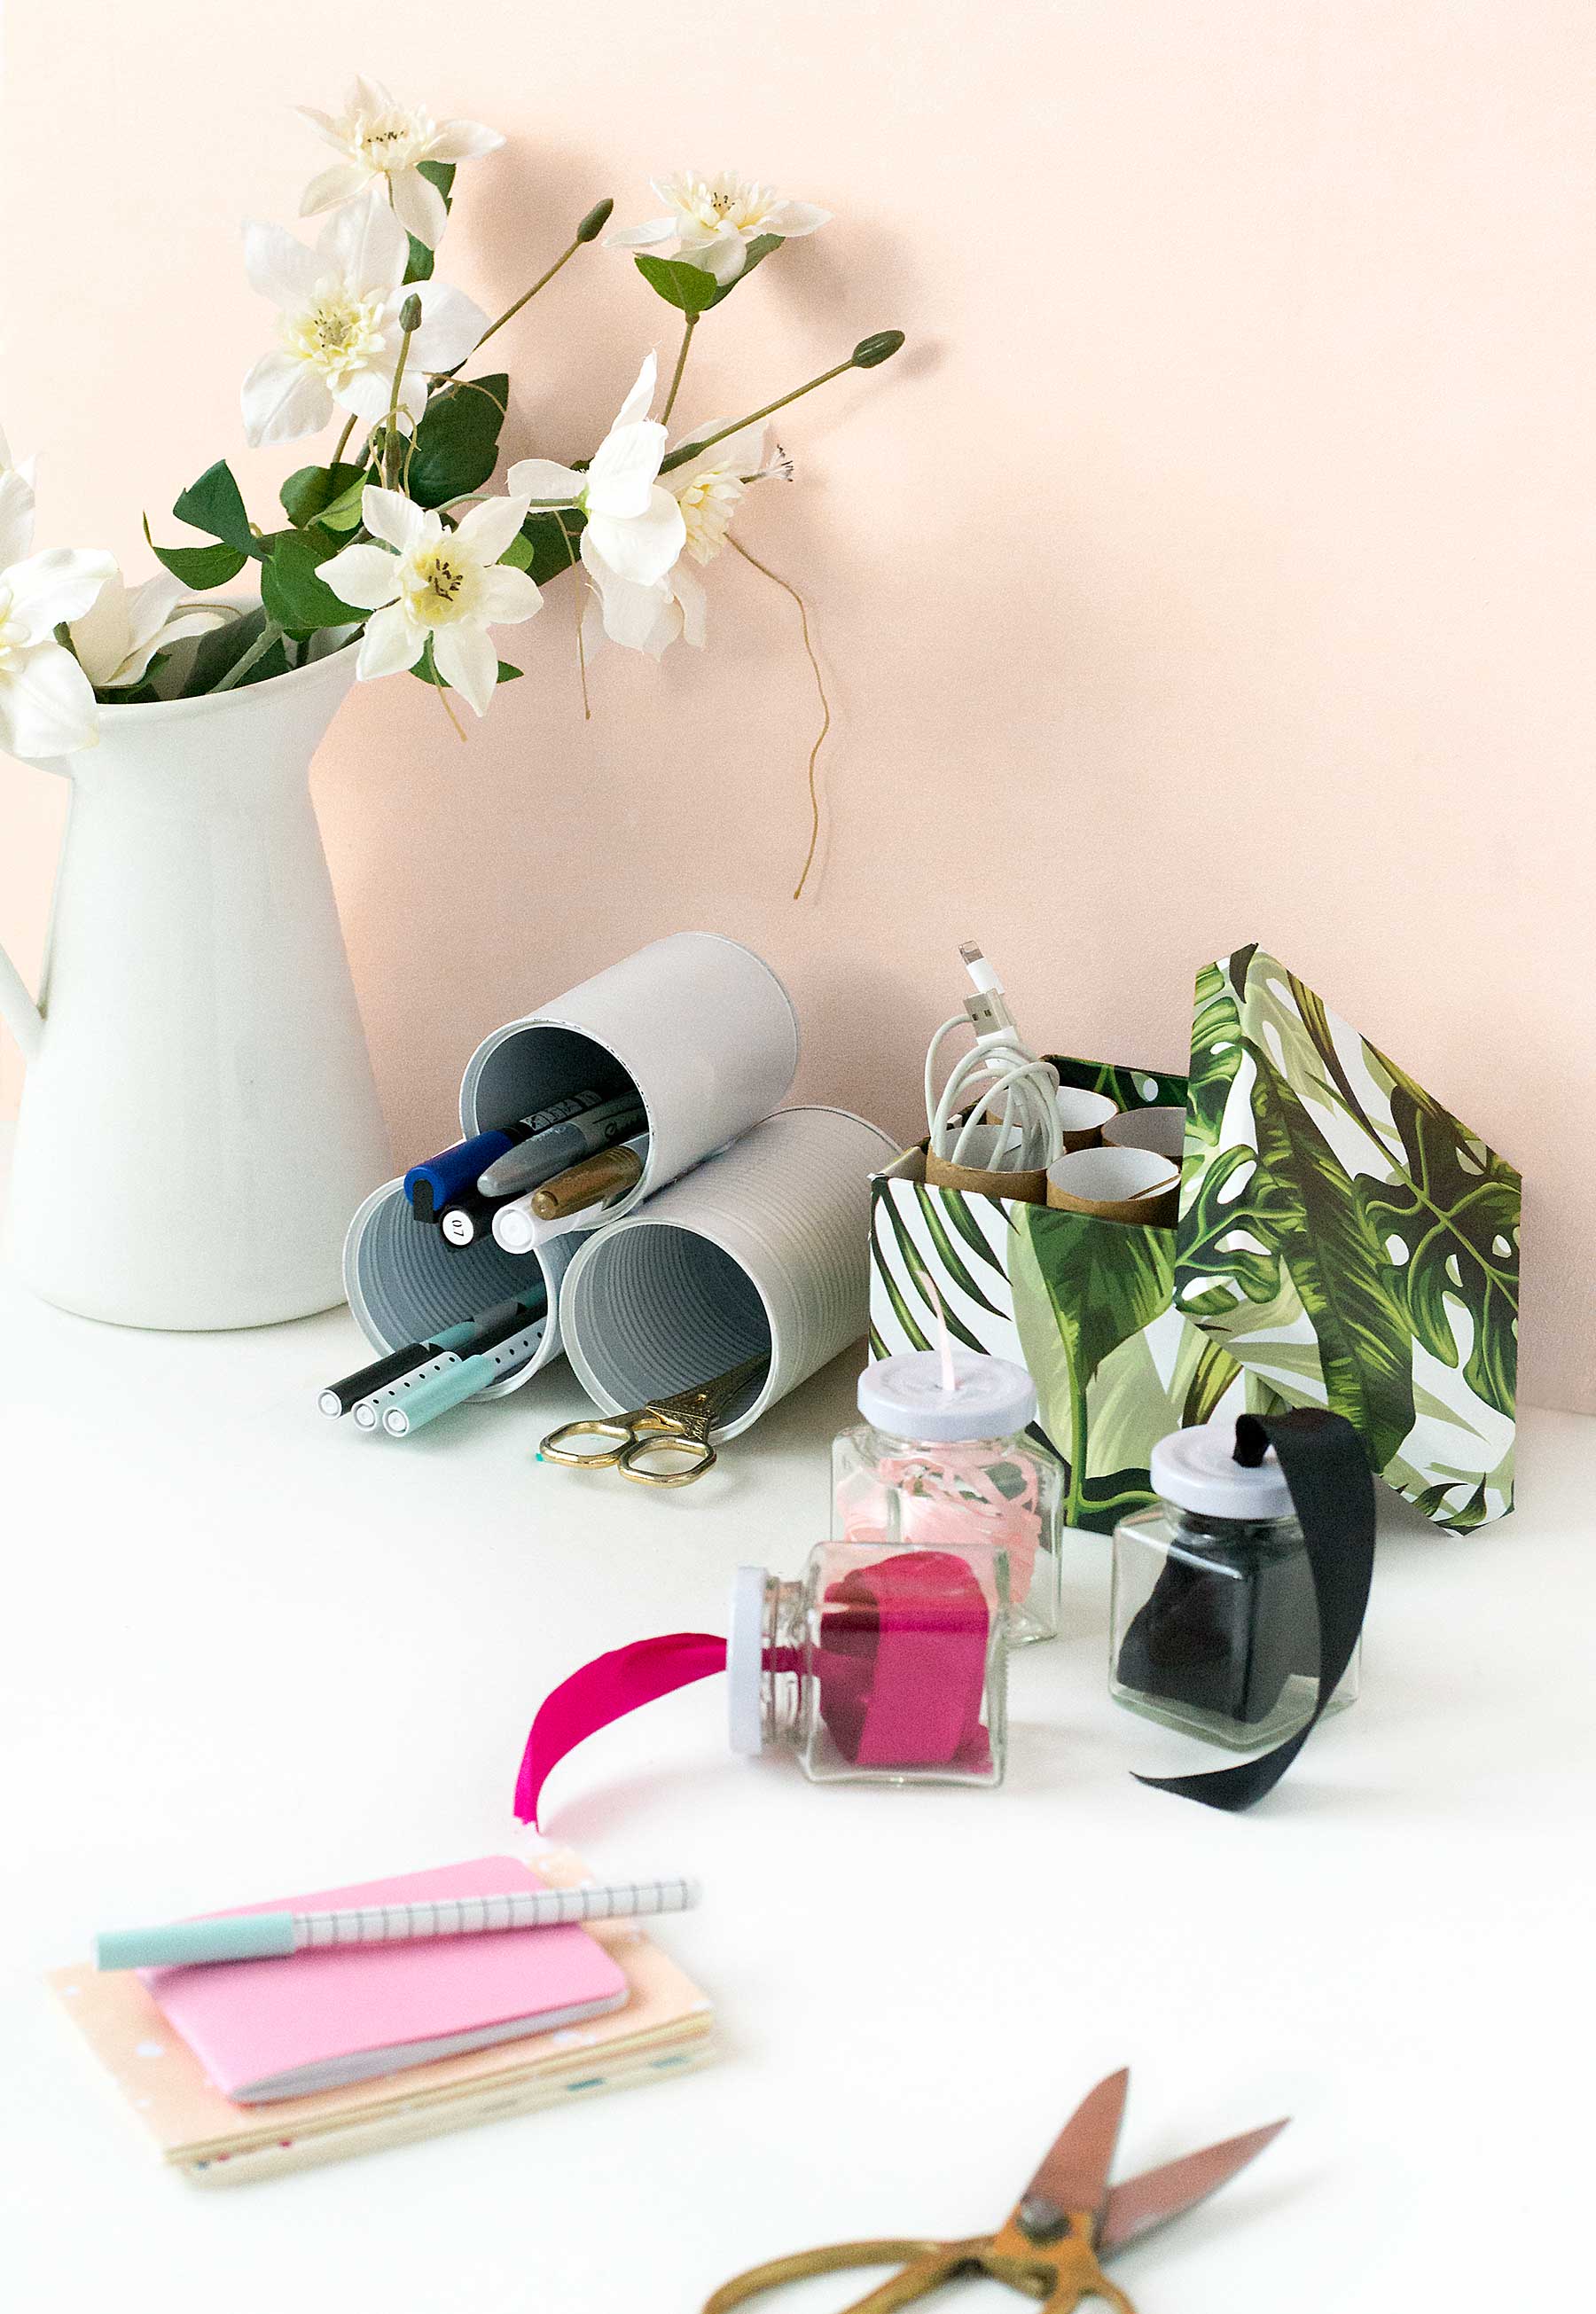 DIY hacks to curb office clutter - Make and Tell for Curbly